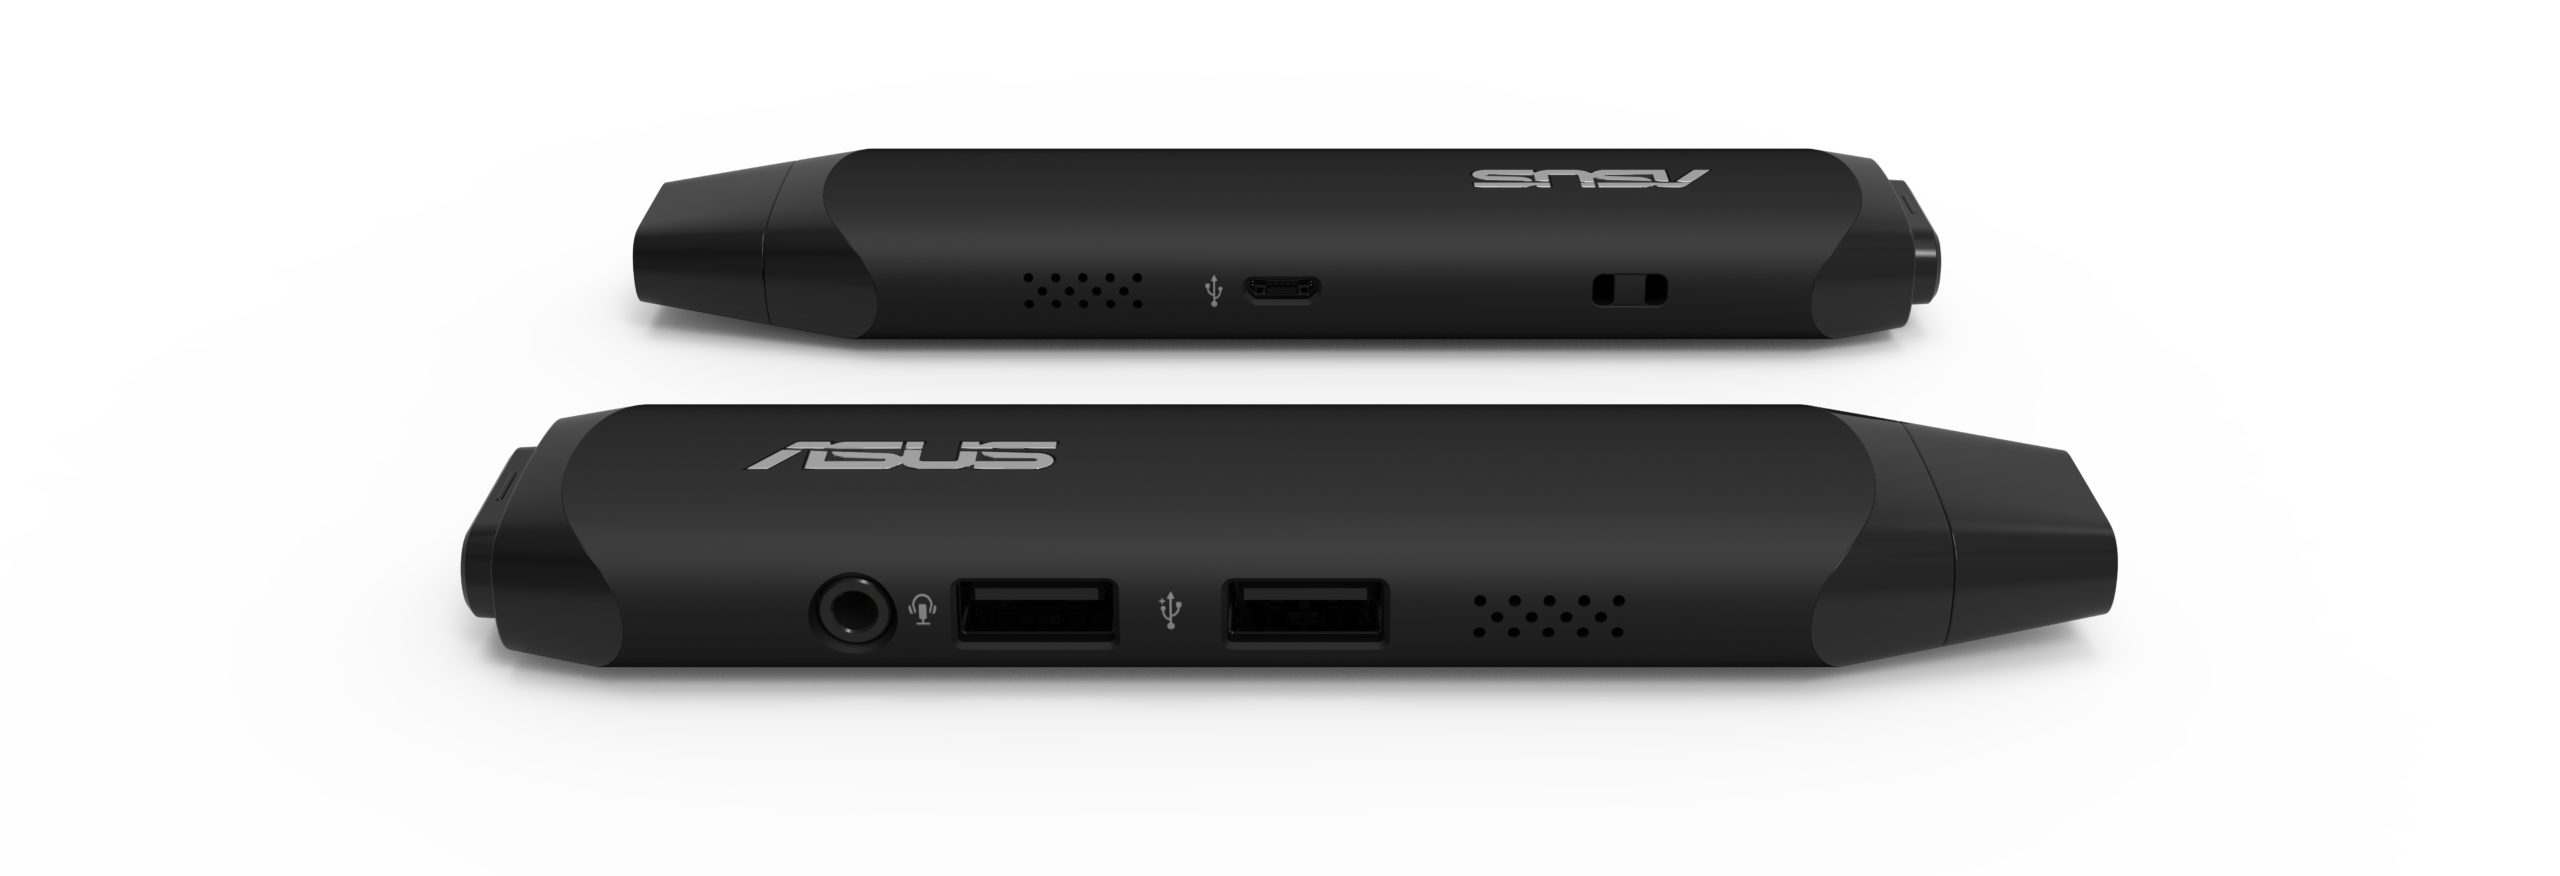 Asus $US130 Windows PC-On-A-Stick Might Be The Best Yet